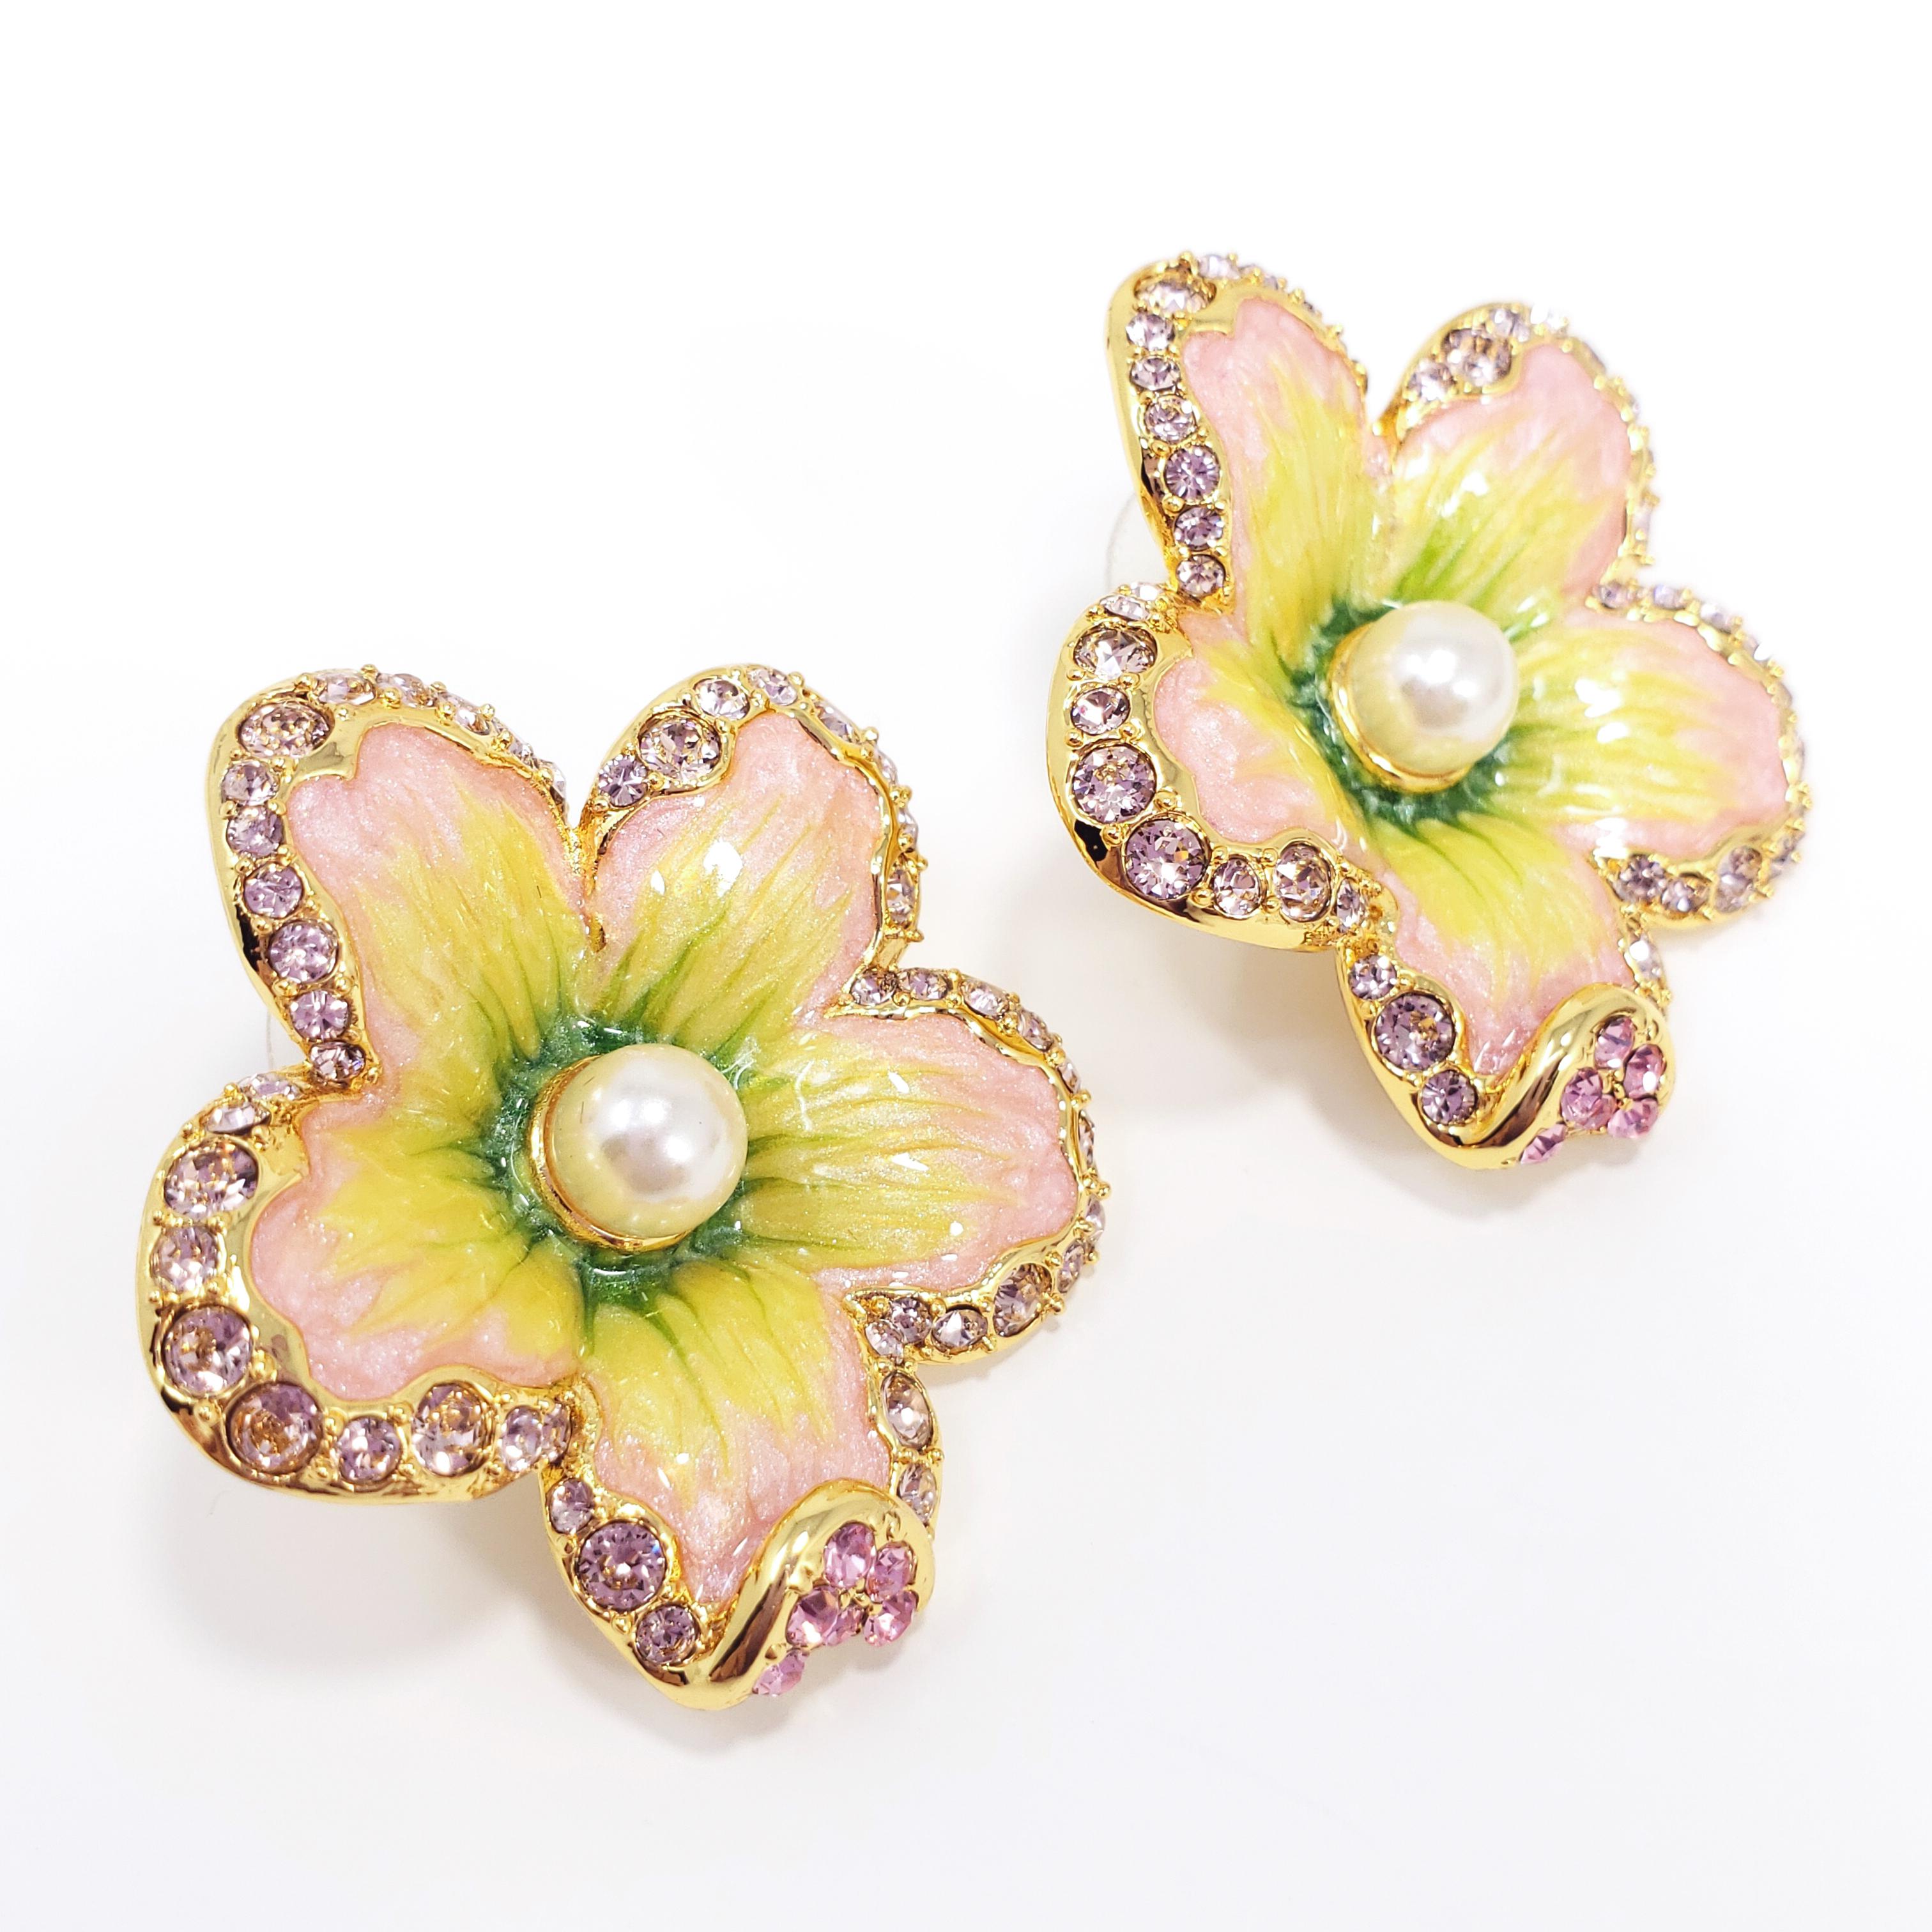 Flower power! A pair of ornate floral earrings featuring pink crystals & faux pearls. Painted with green and pink enamel, with post backs. Set on gold plated metal.

Hallmarks: Jay, Jay Strongwater, CN

By Jay Strongwater, originally for HSN.